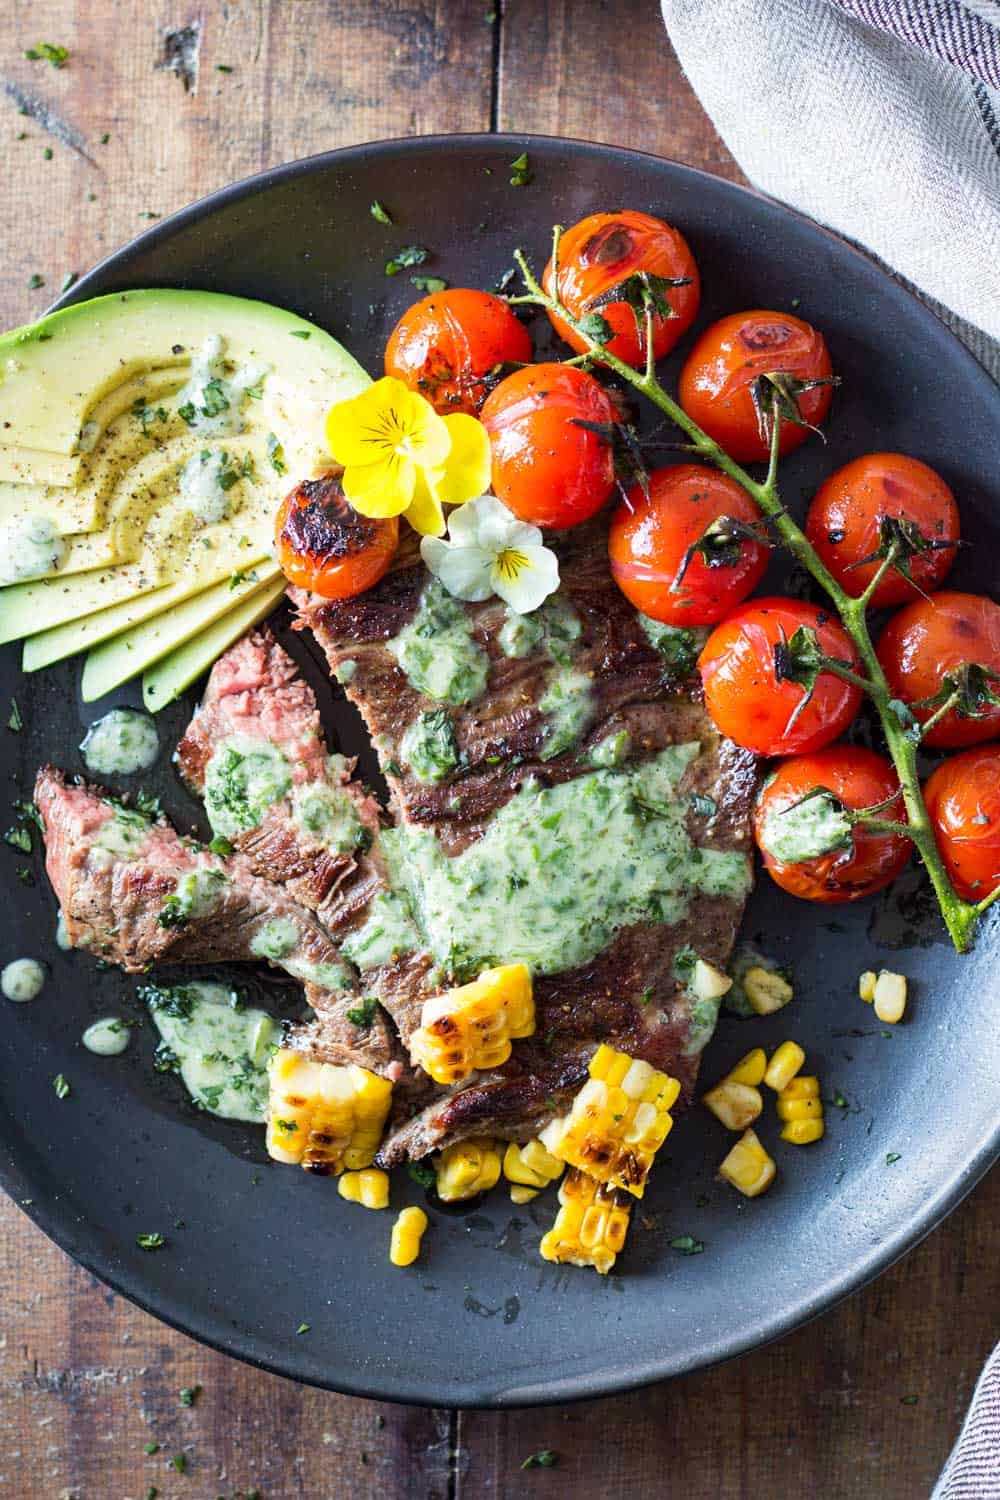 Skirt Steak with Basil Cream and Grilled Tomatoes, corn kernels and sliced avocado on a black plate.